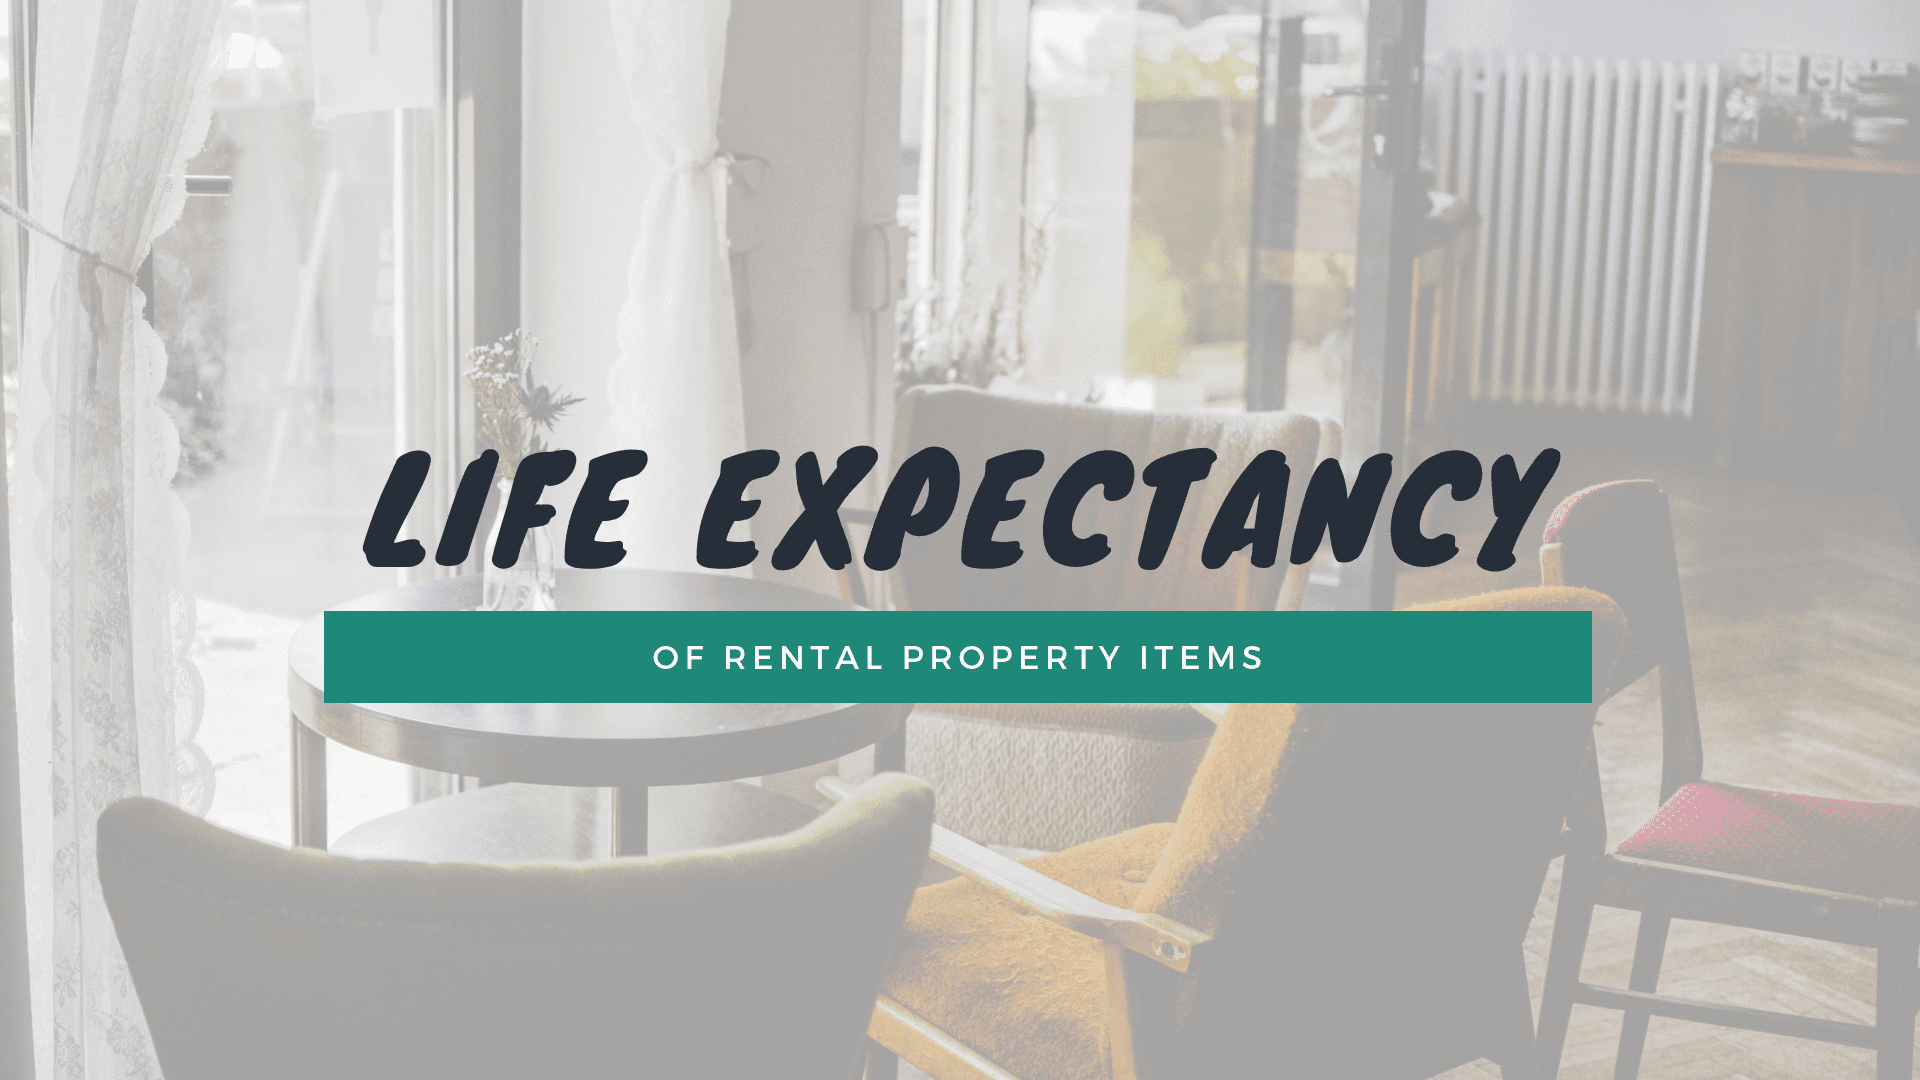 A Guide on the Life Expectancy of Santa Cruz Rental Property Items